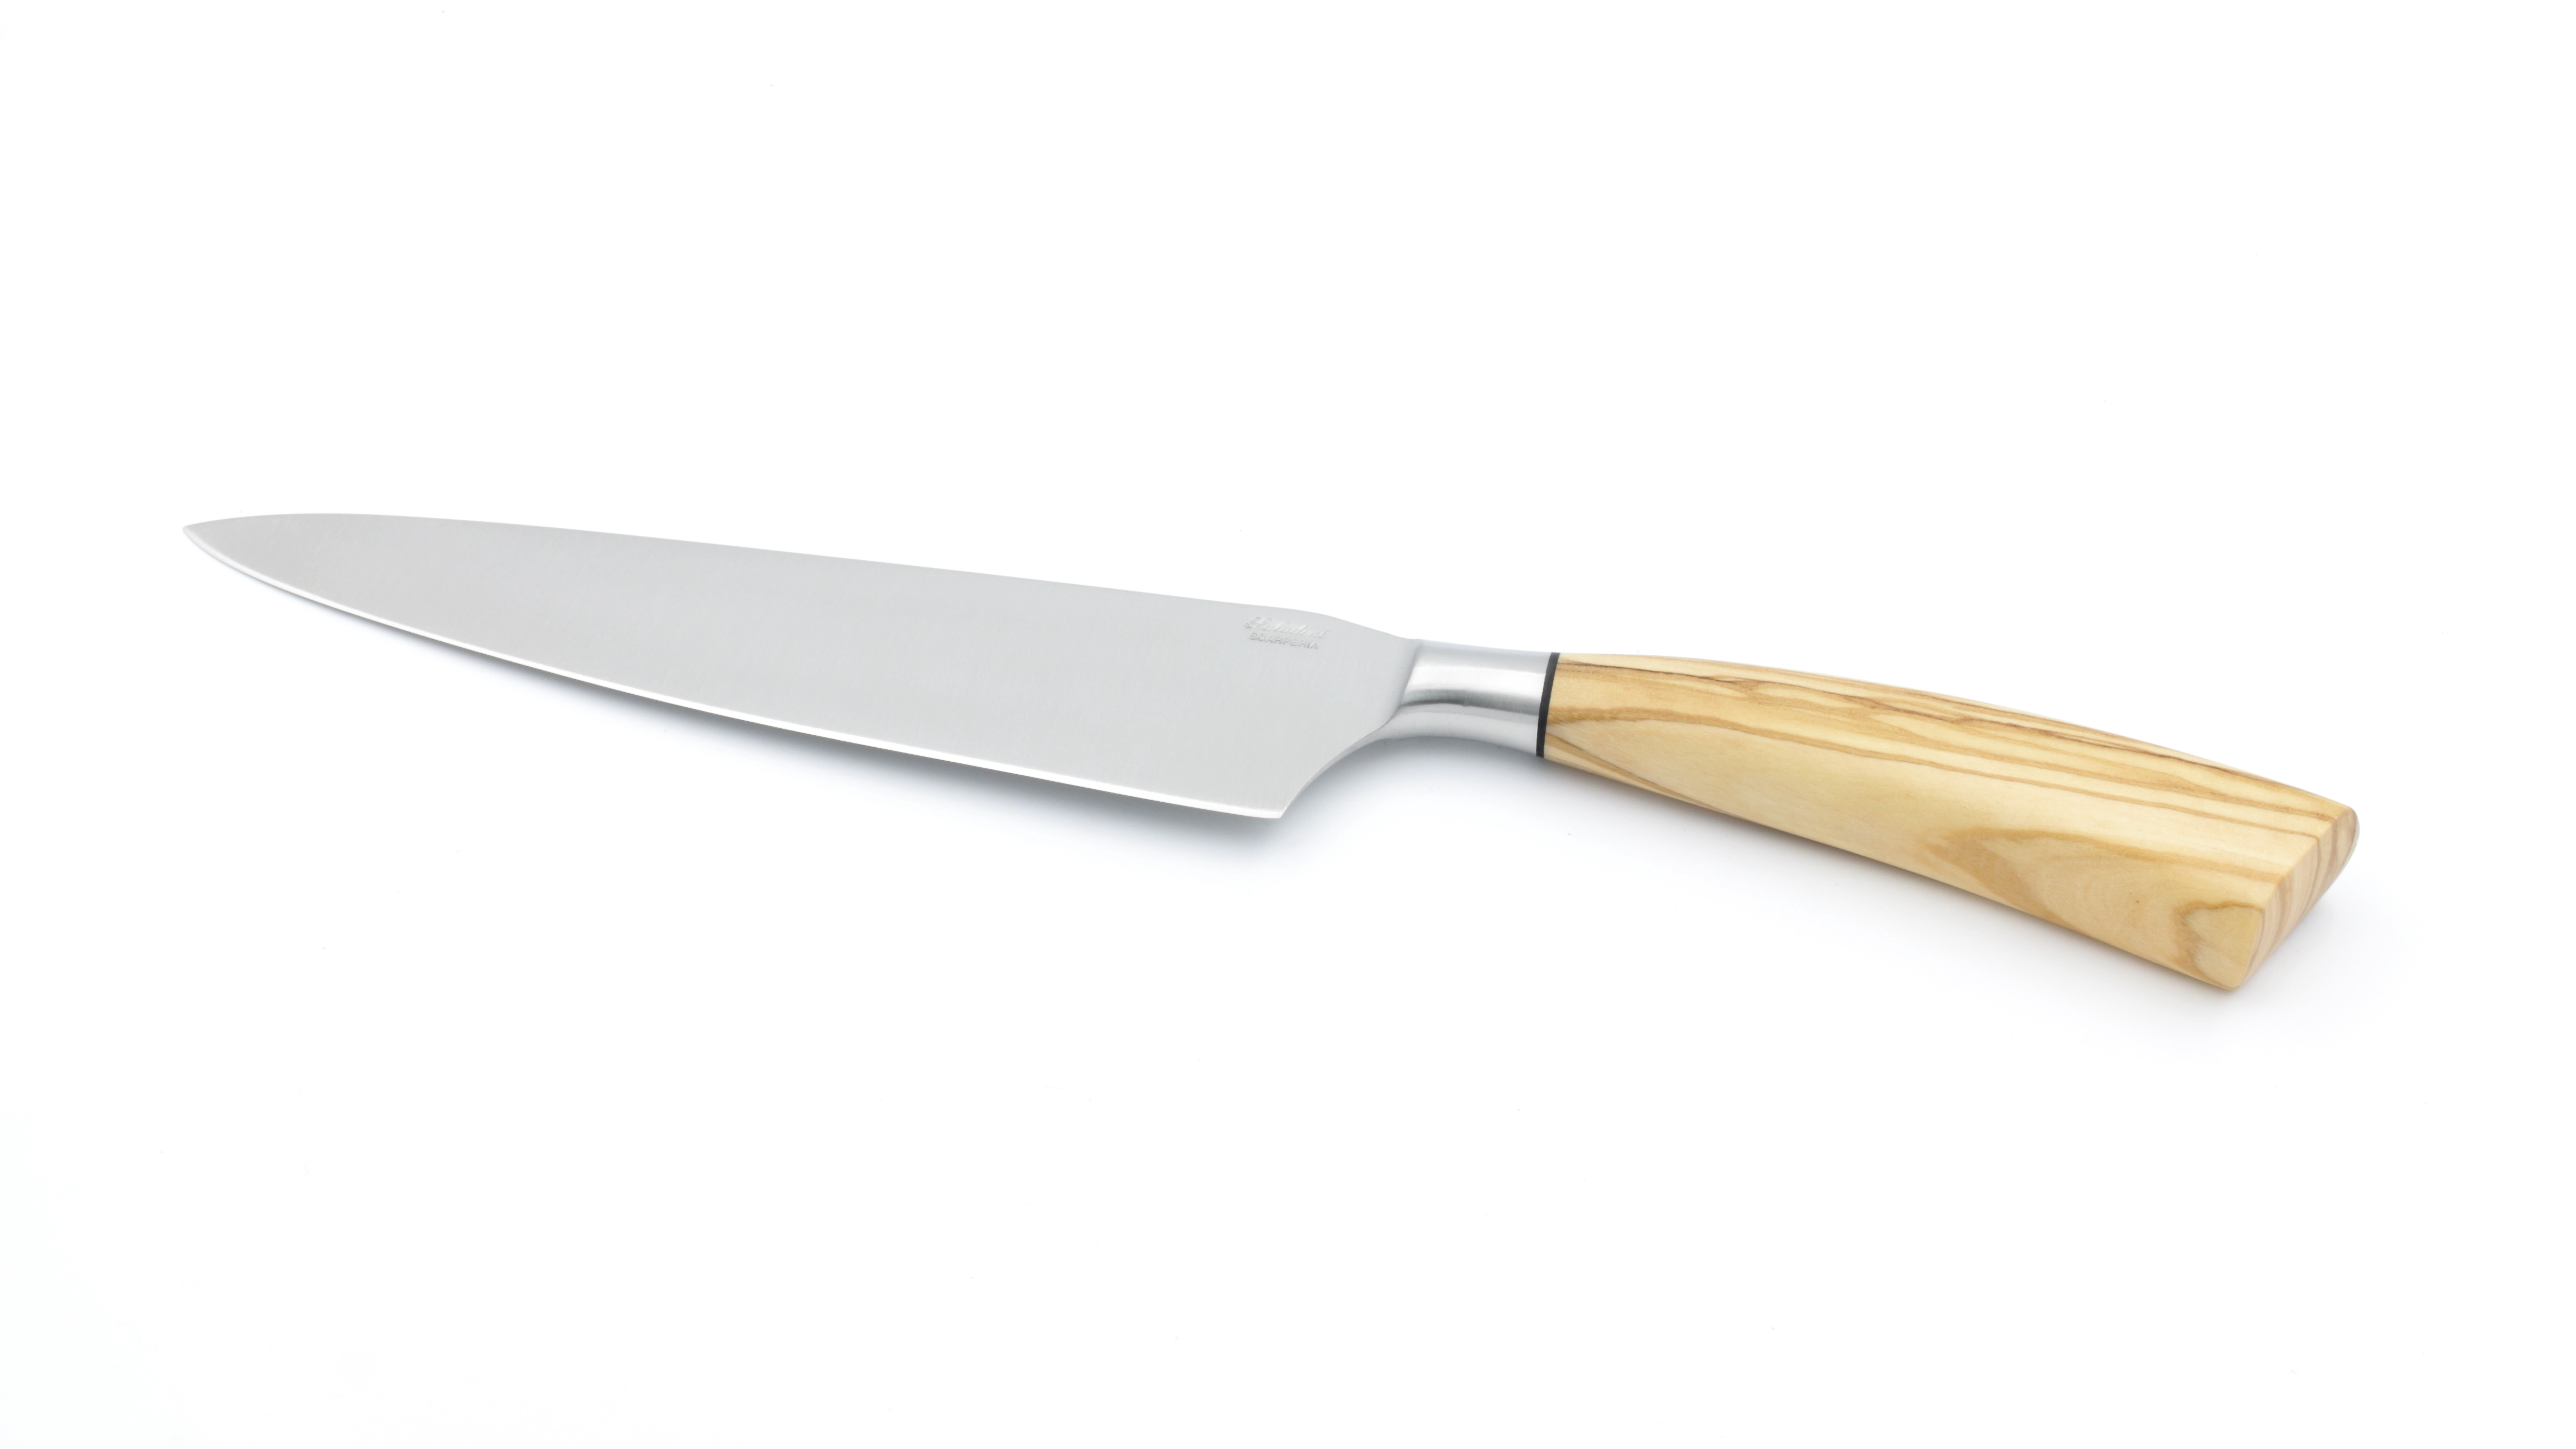 Chef's Knife-Olive Wood & Stainless